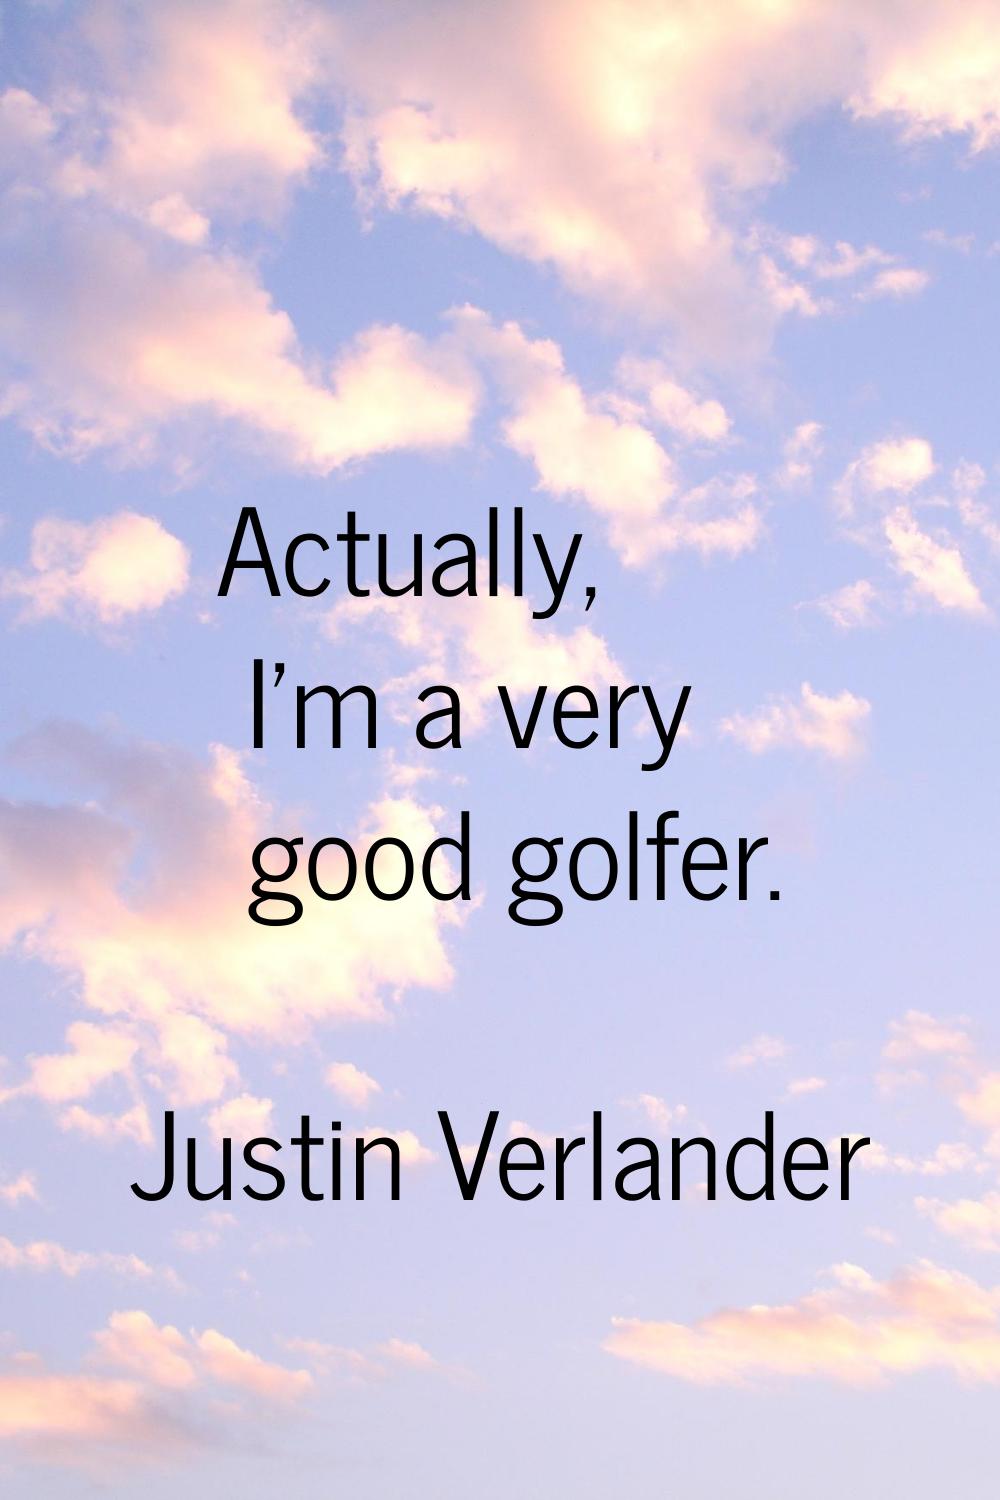 Actually, I'm a very good golfer.